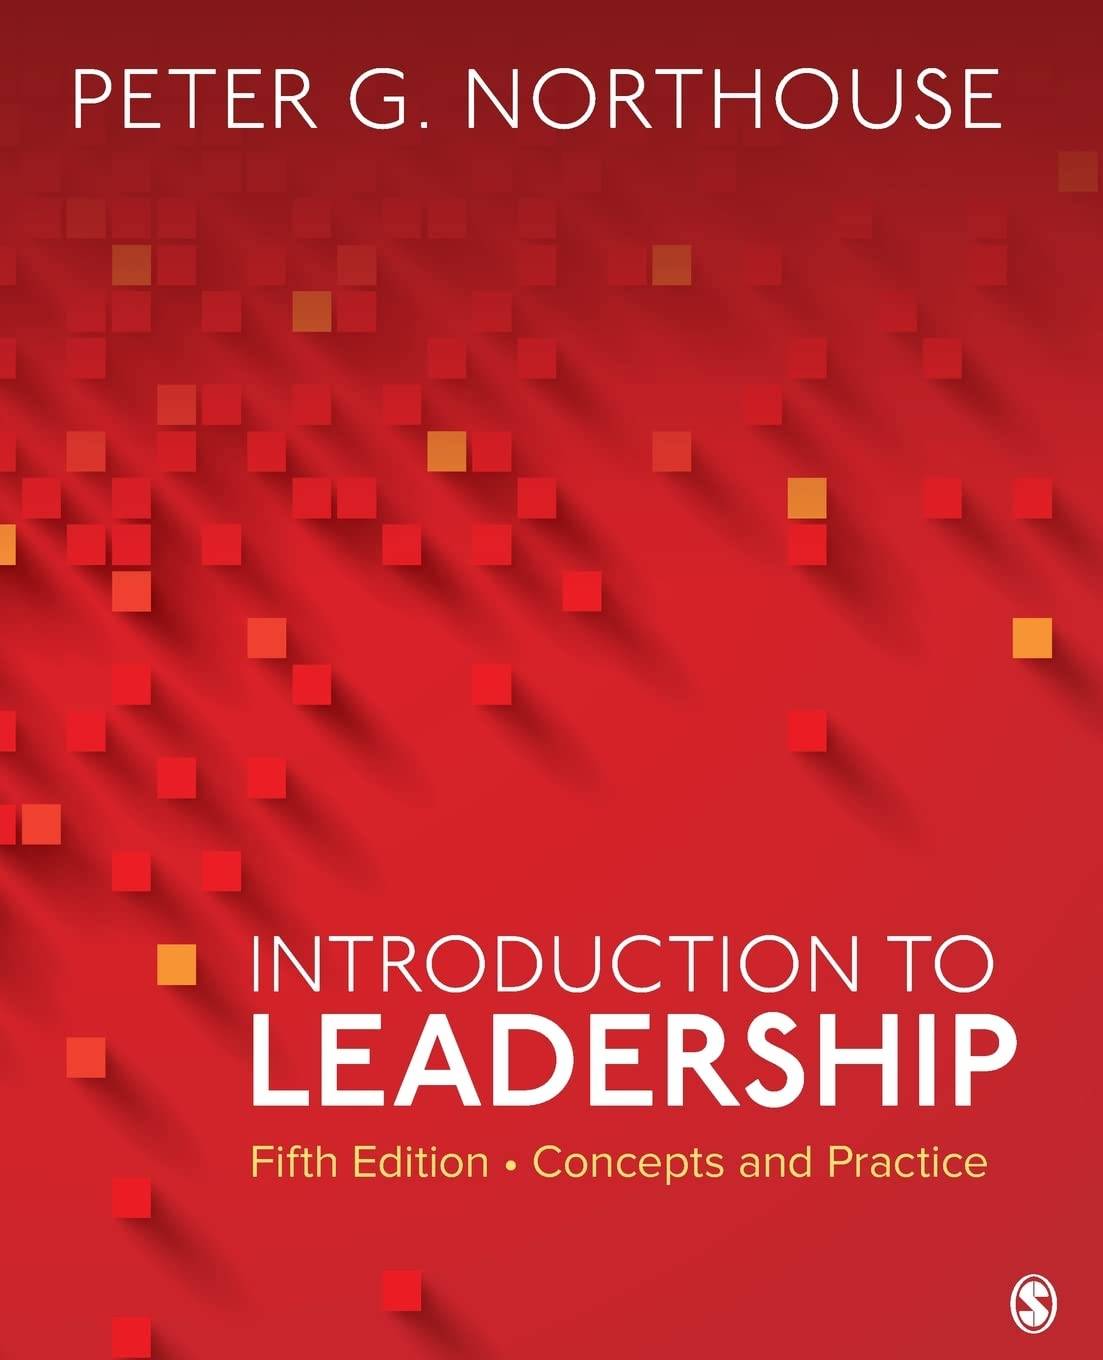 Introduction to Leadership: Concepts and Practice 5th Edition Review